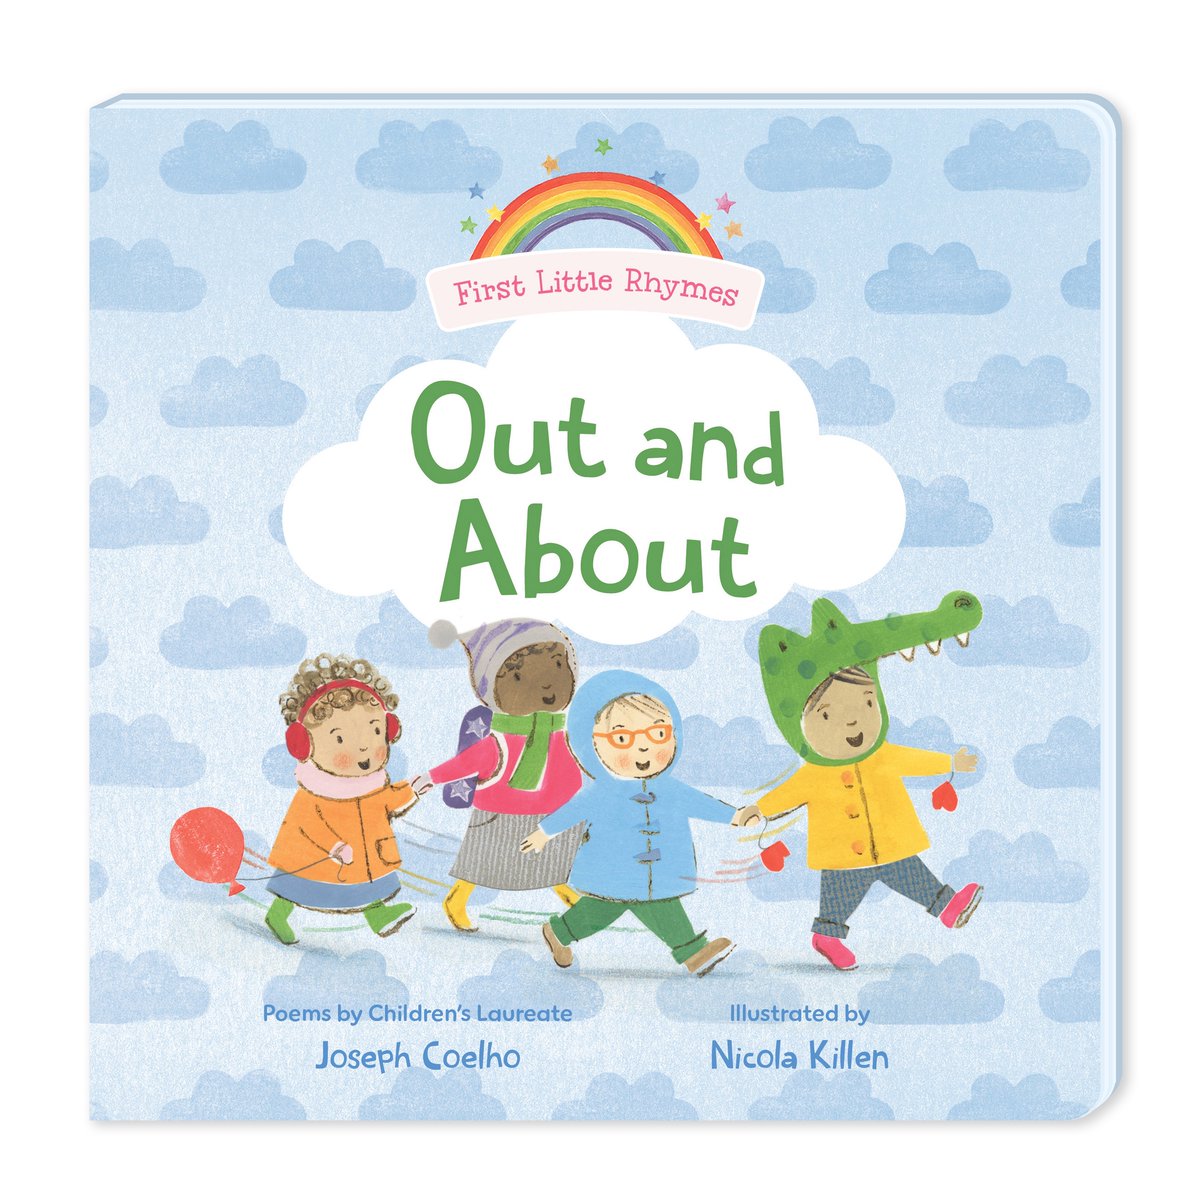 Children's Laureate @JosephACoelho and illustrator @nicolakillen present a delightful collection of short poems on going out and about in the world! FIRST LITTLE RHYMES: OUT AND ABOUT is out today in a chunky board book format! 🌈